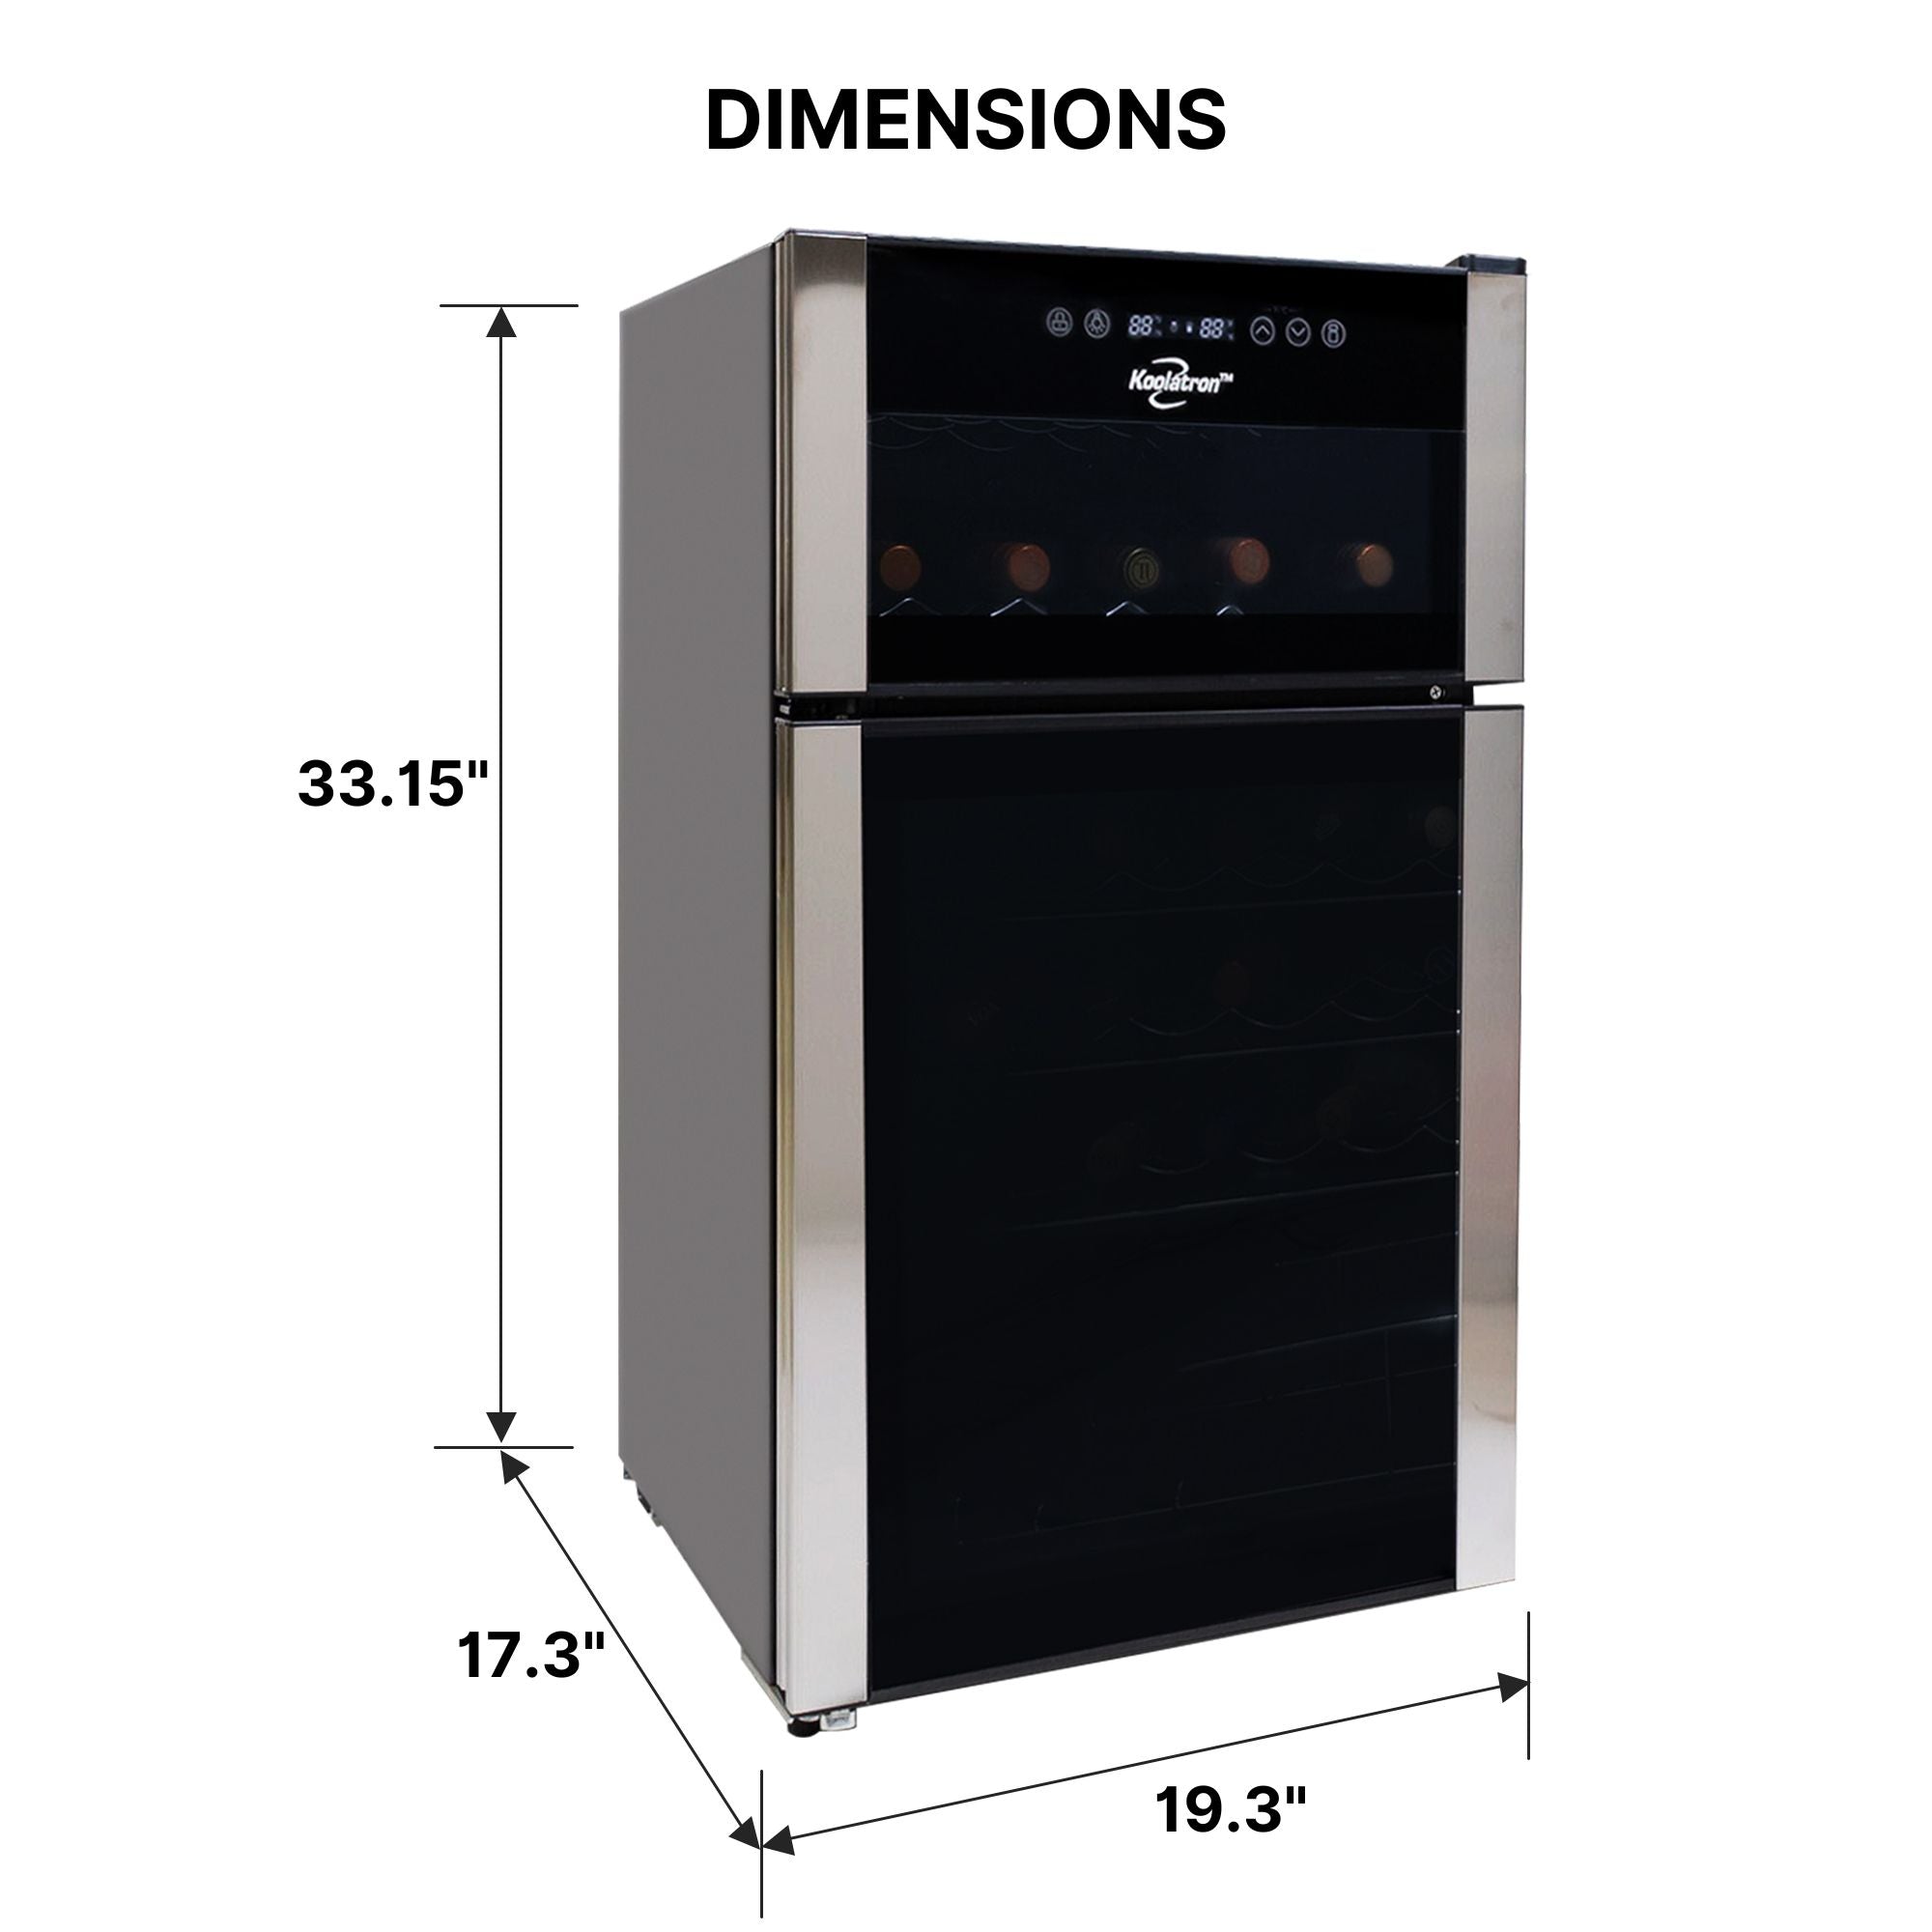 Koolatron 29 bottle dual zone thermoelectric wine fridge on a white background with dimensions labeled